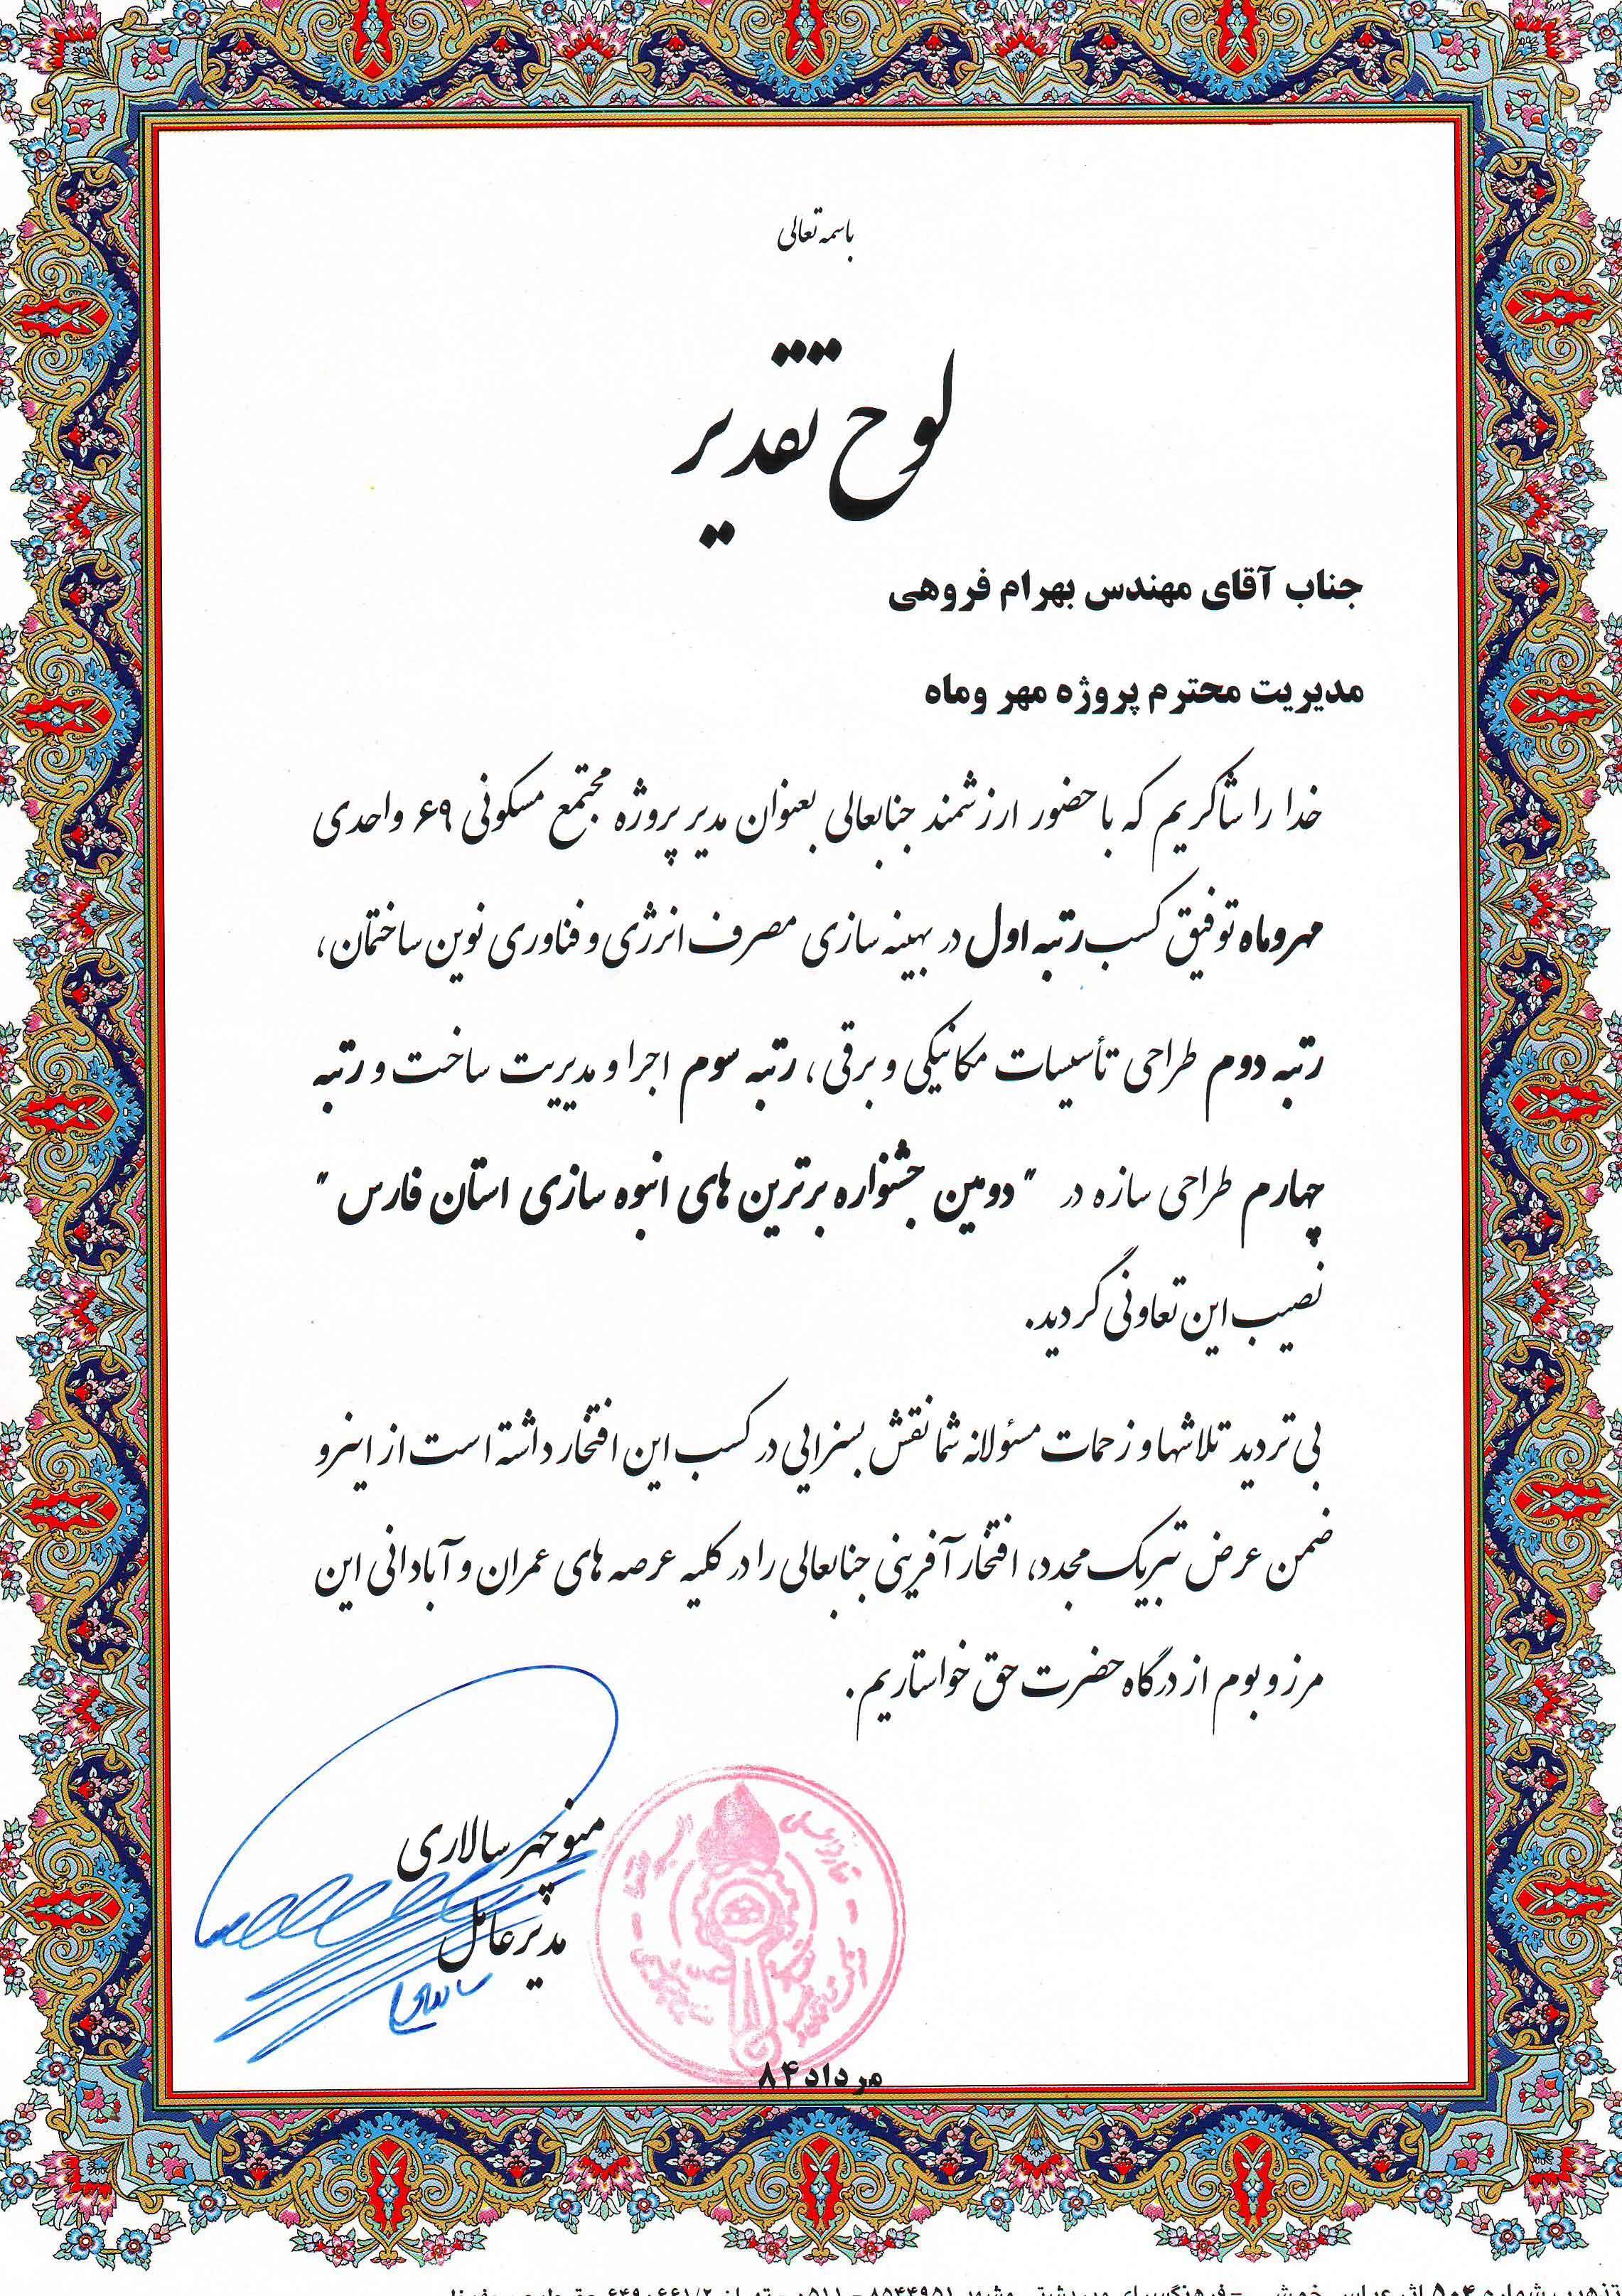 Acknowledement from managerdirectur of Mehr and Mah Project